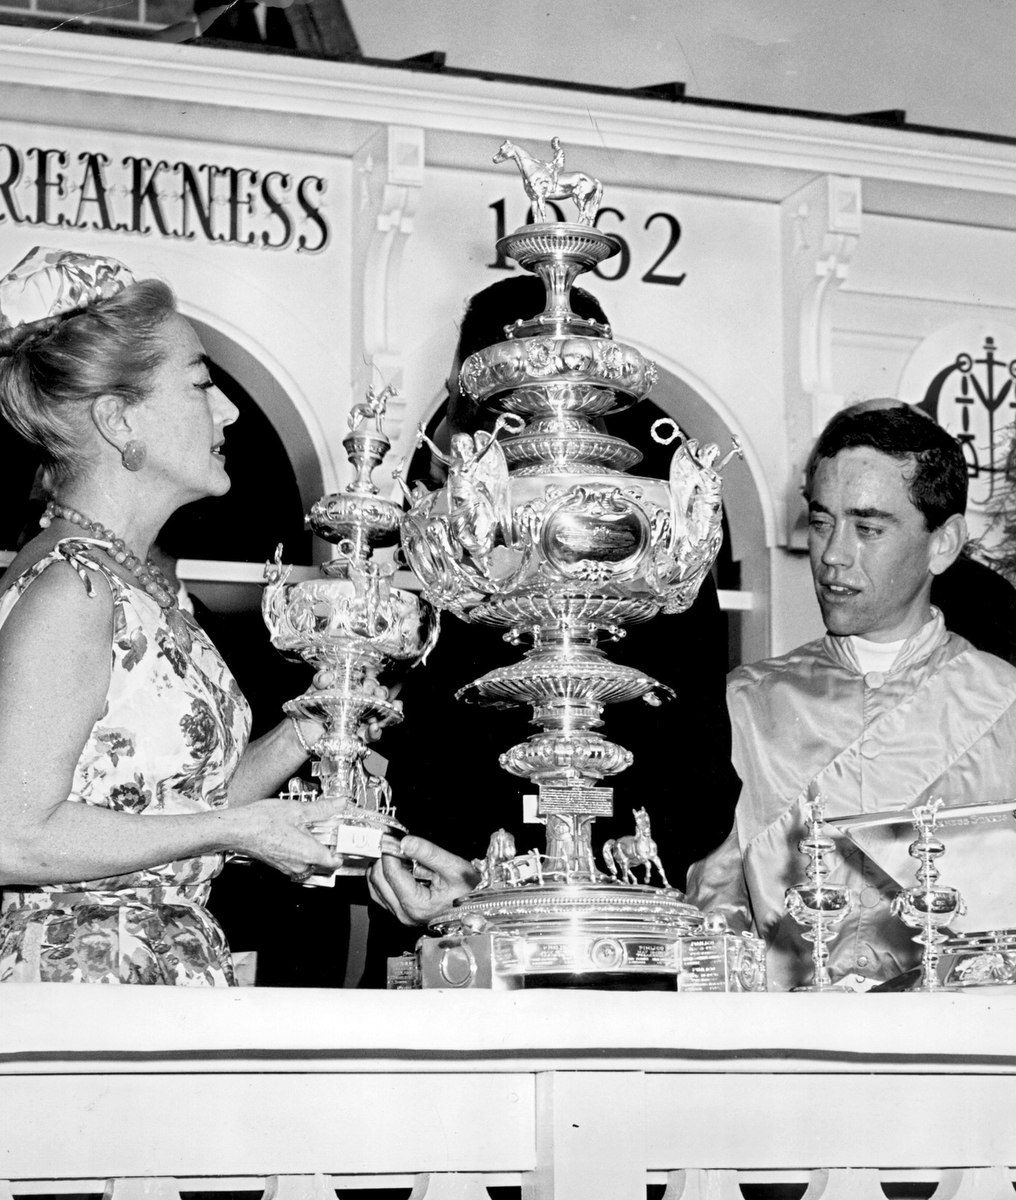 May 1962. Presenting jockey John Rotz with the Preakness trophy for Greek Money's win.